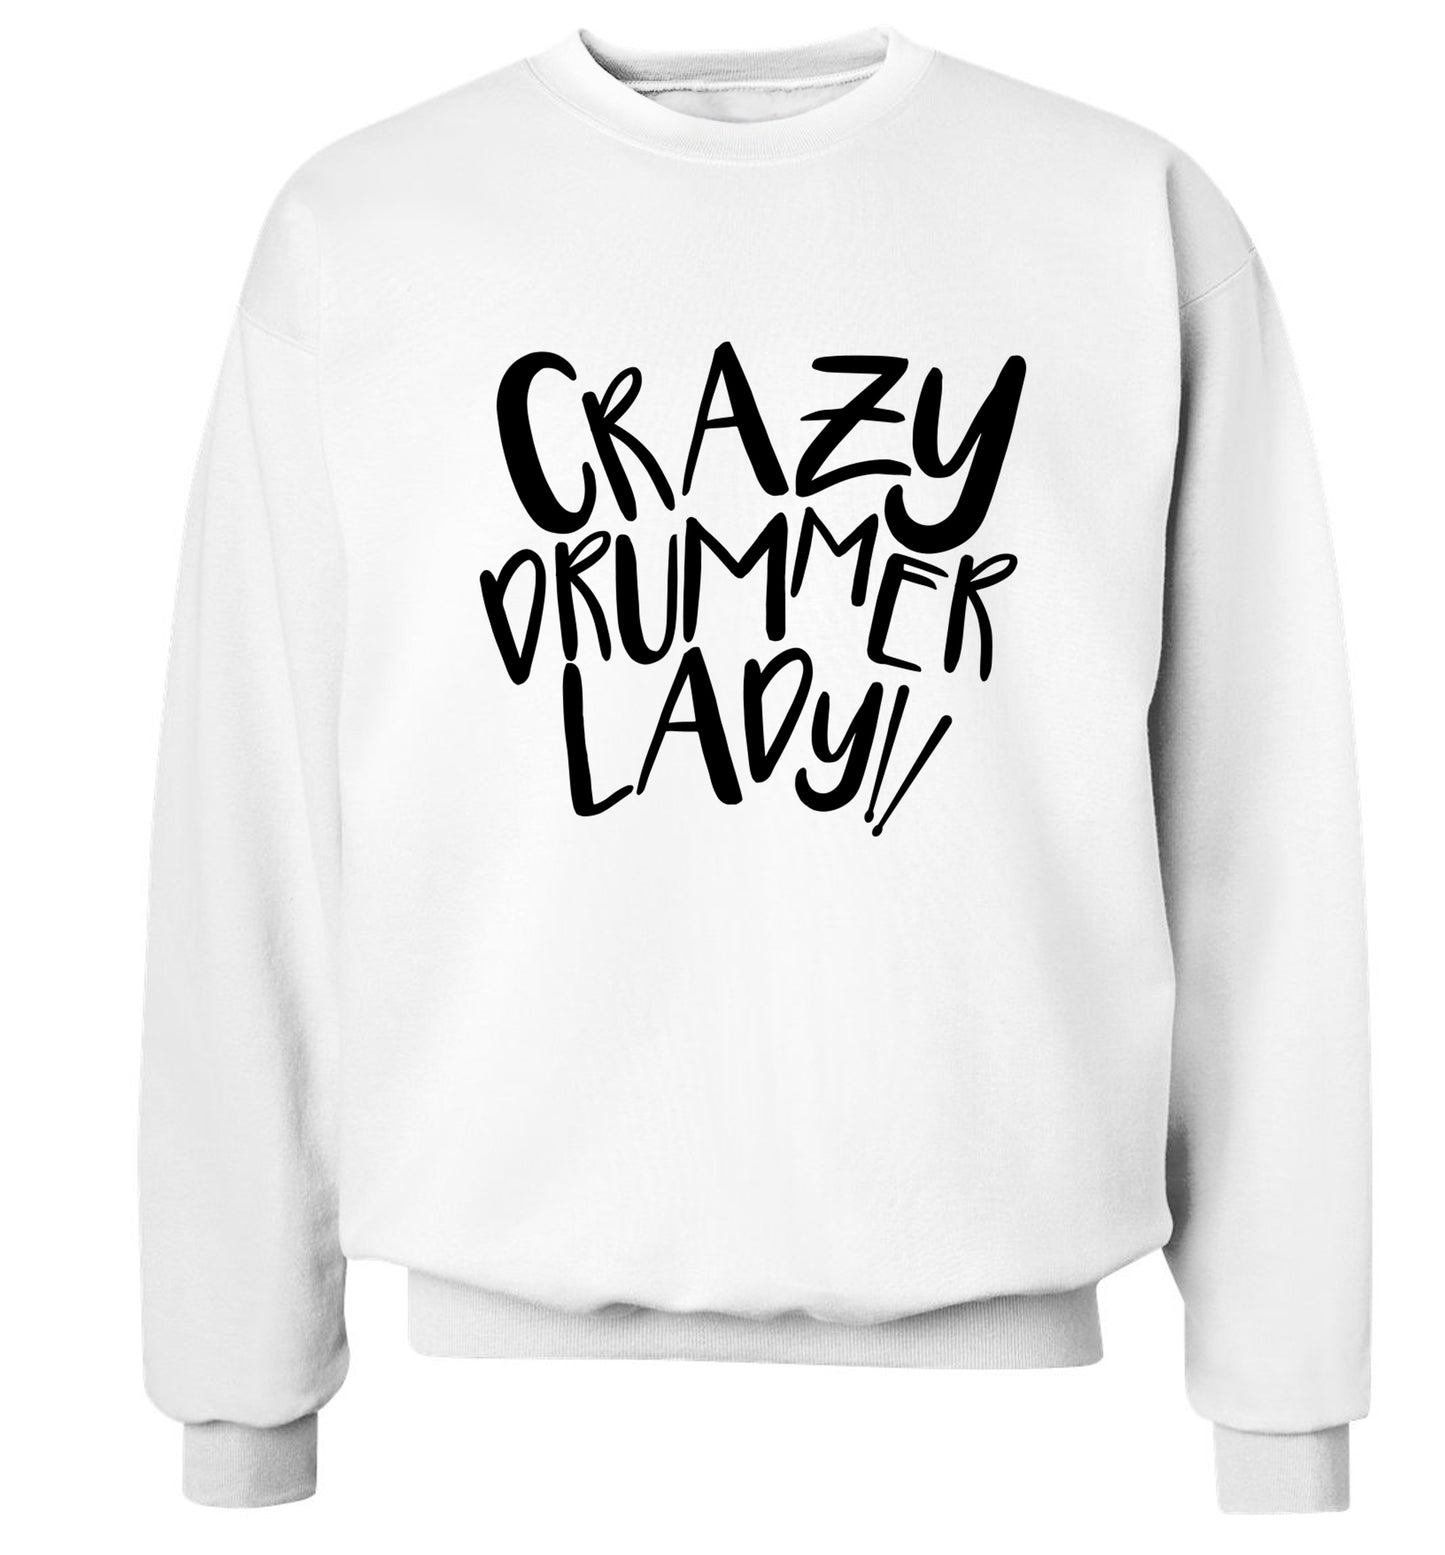 Crazy drummer lady Adult's unisex white Sweater 2XL